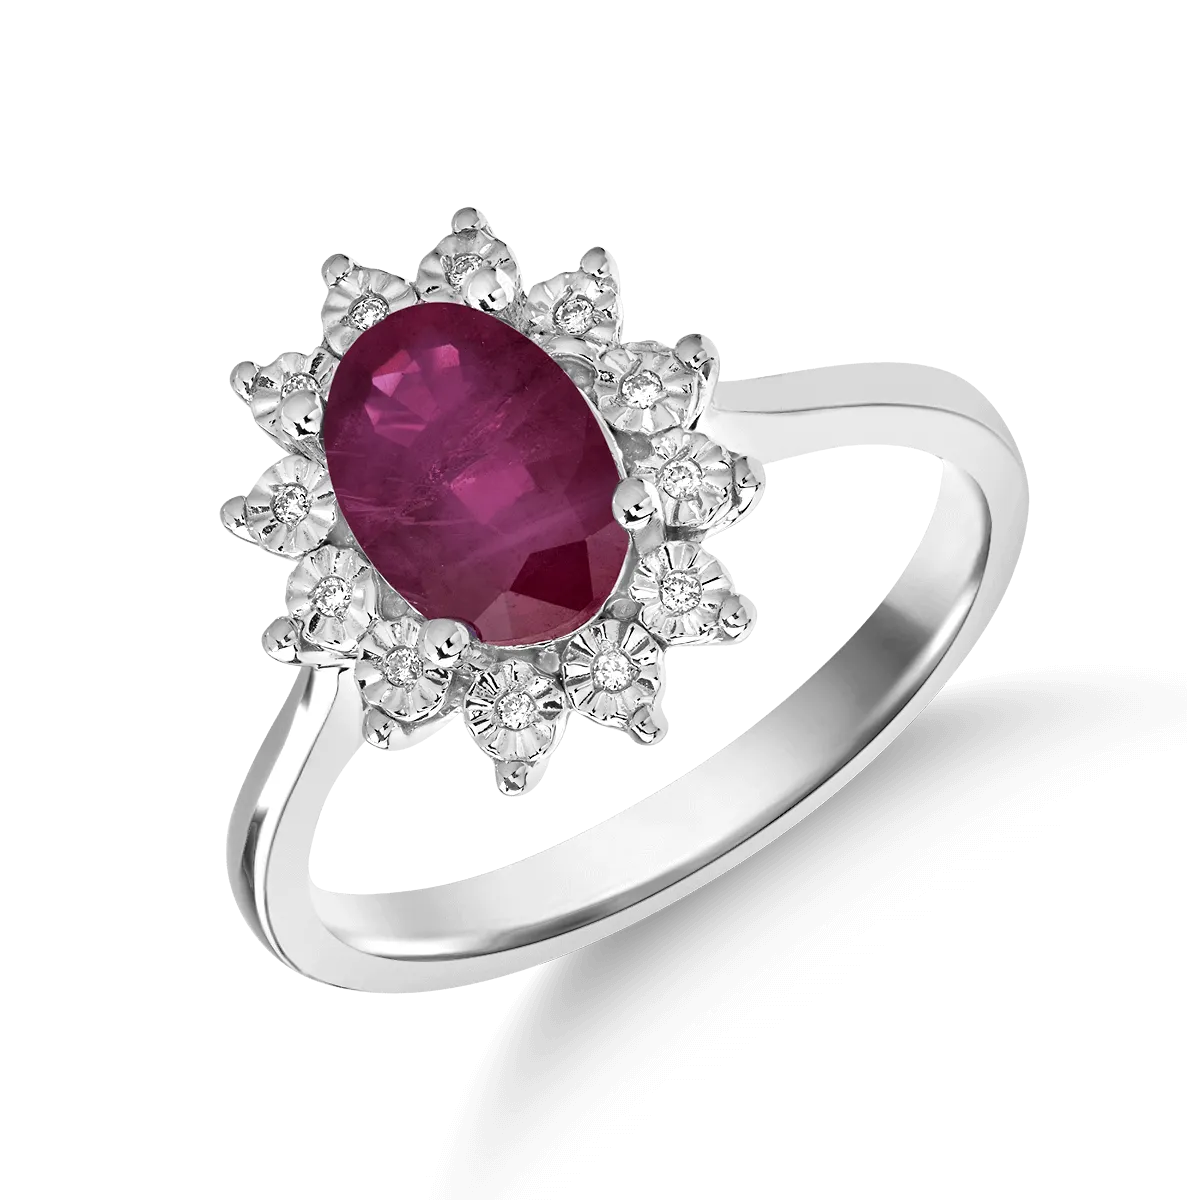 14K white gold ring with 1.72ct ruby and 0.03ct diamonds